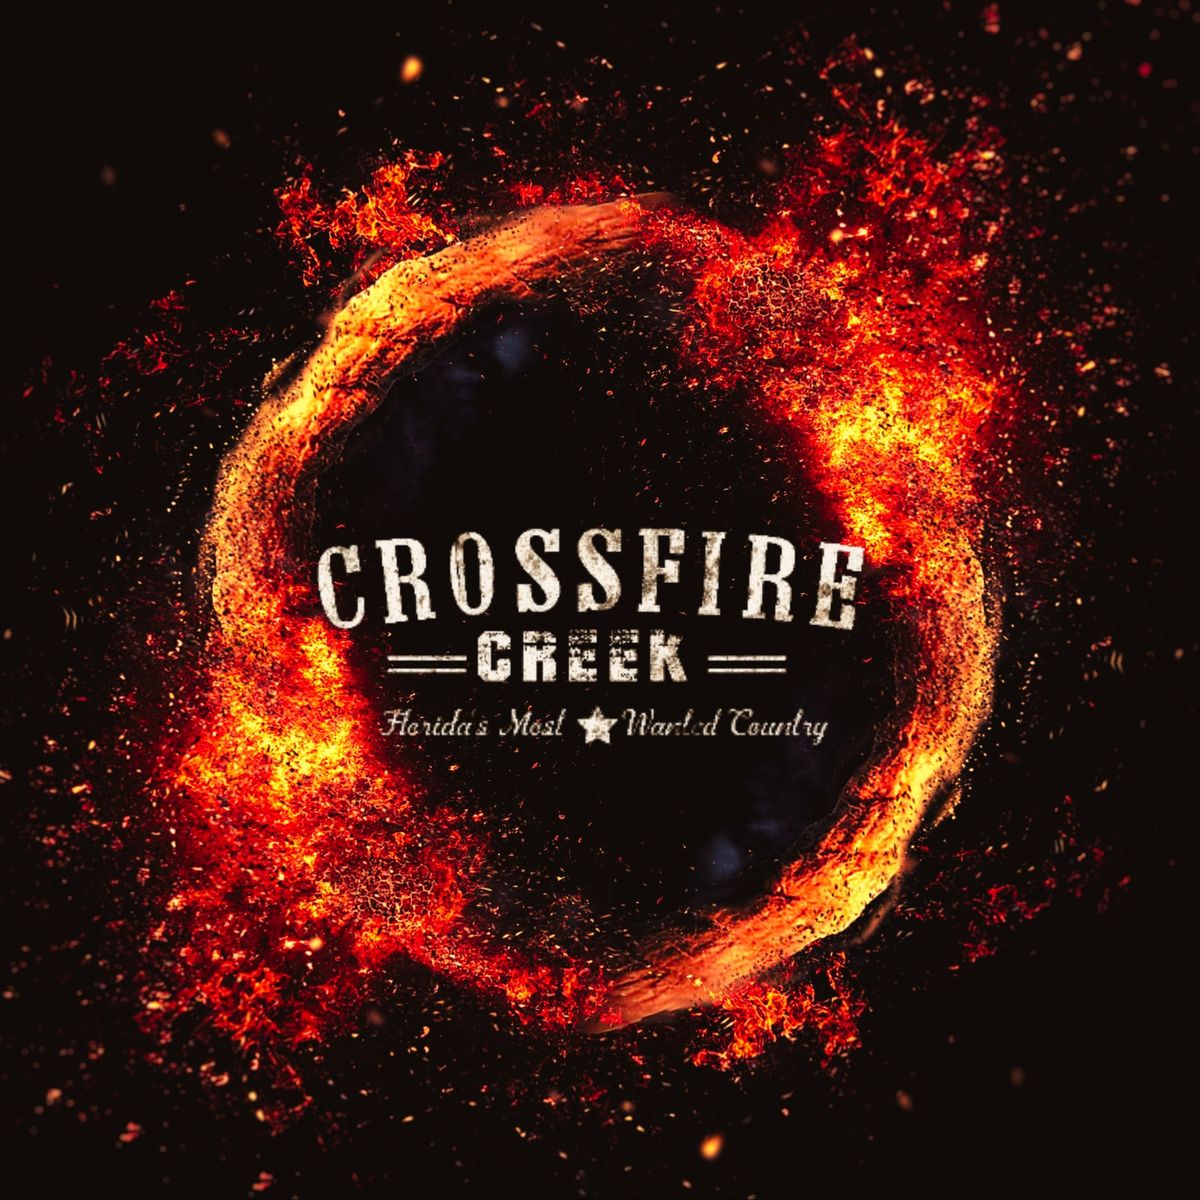 The Social | Crossfire Creek (New Country Band) 